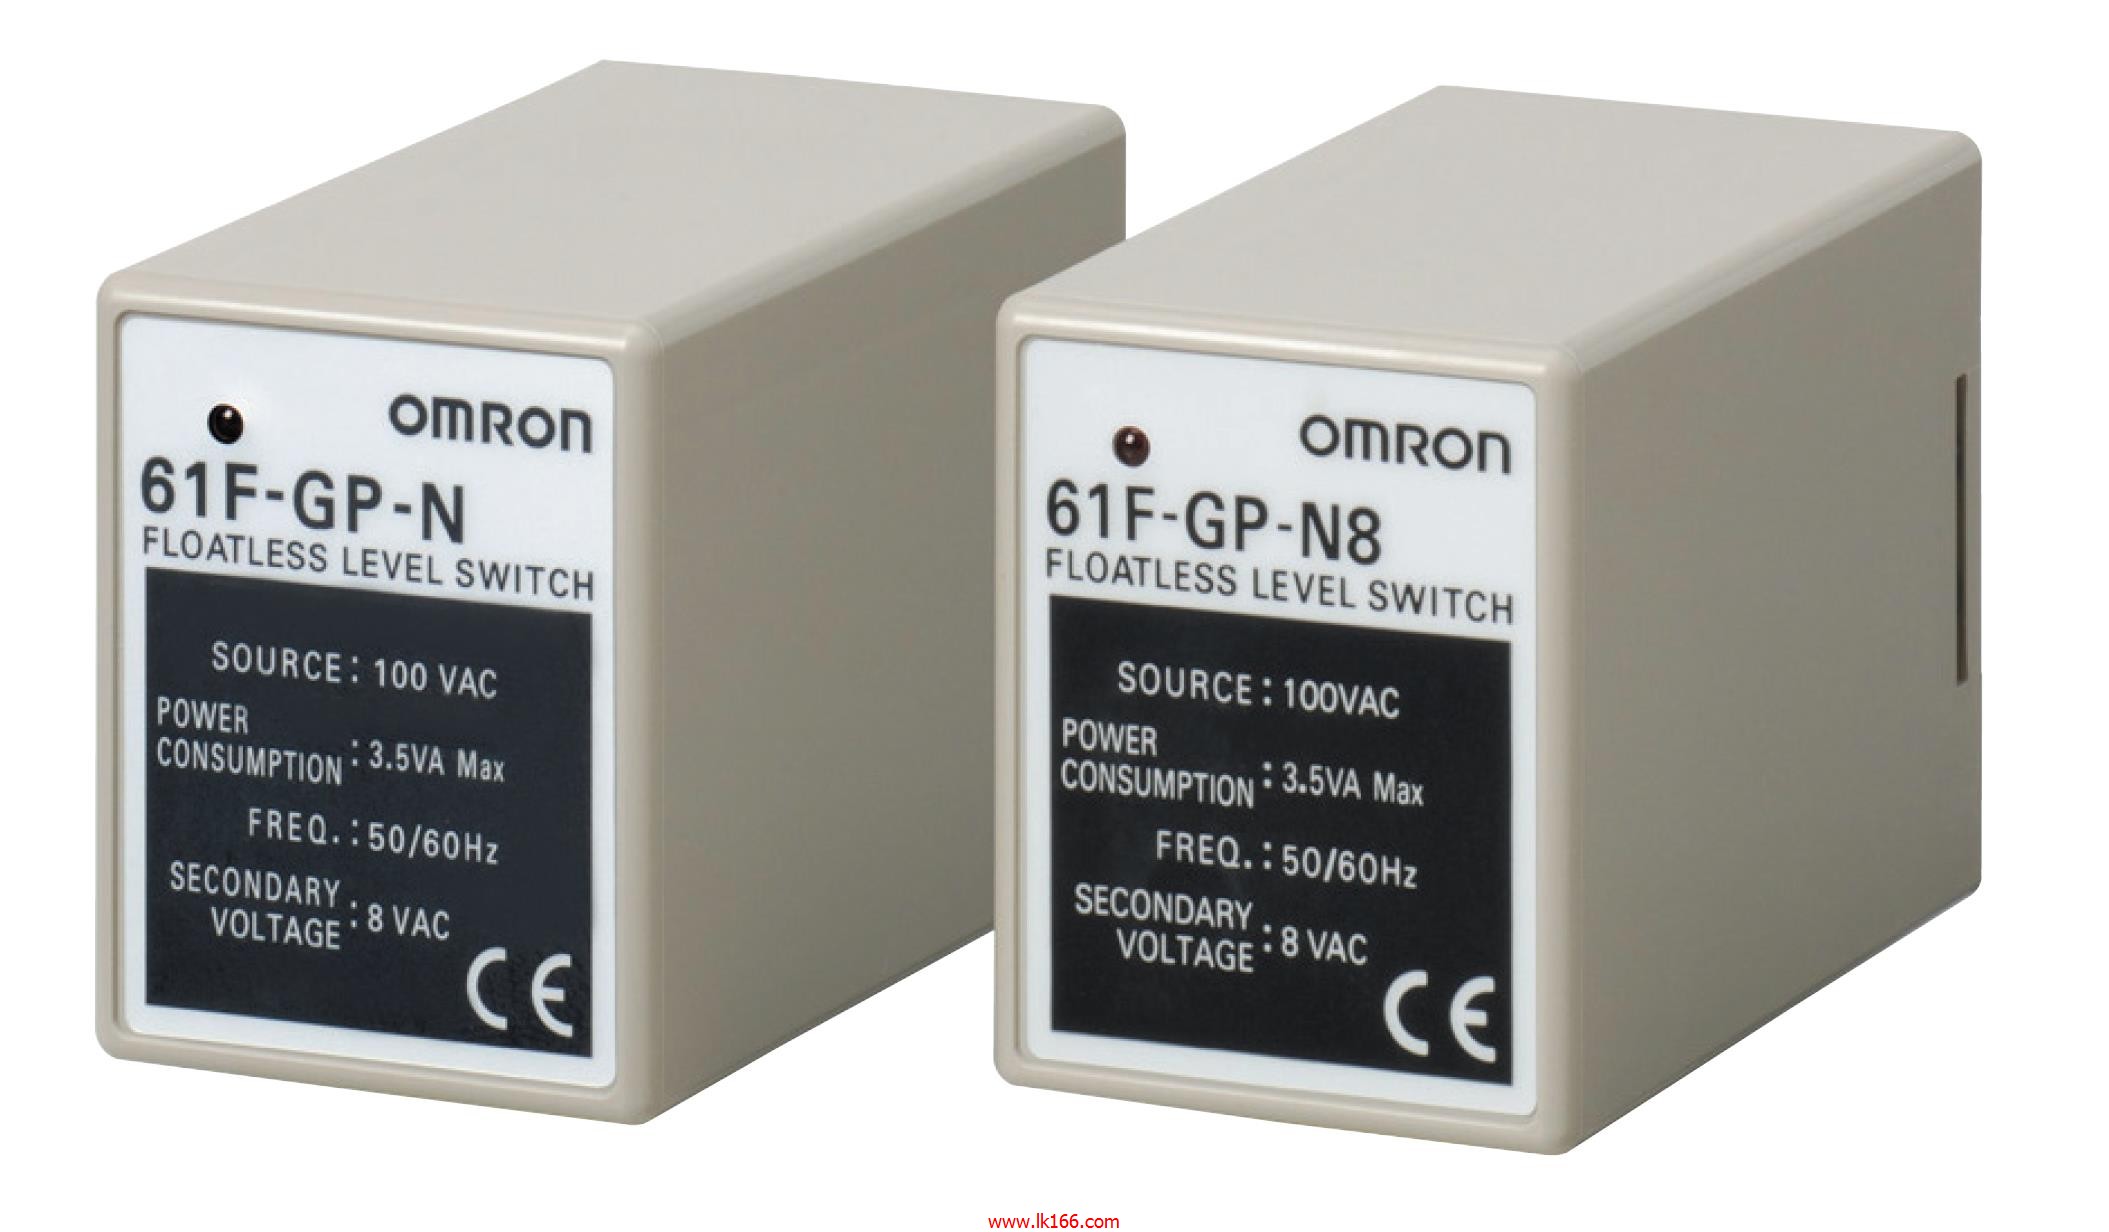 OMRON Floatless Level Switch (Compact, Plug-in Type) 61F-GP-NL 2KM